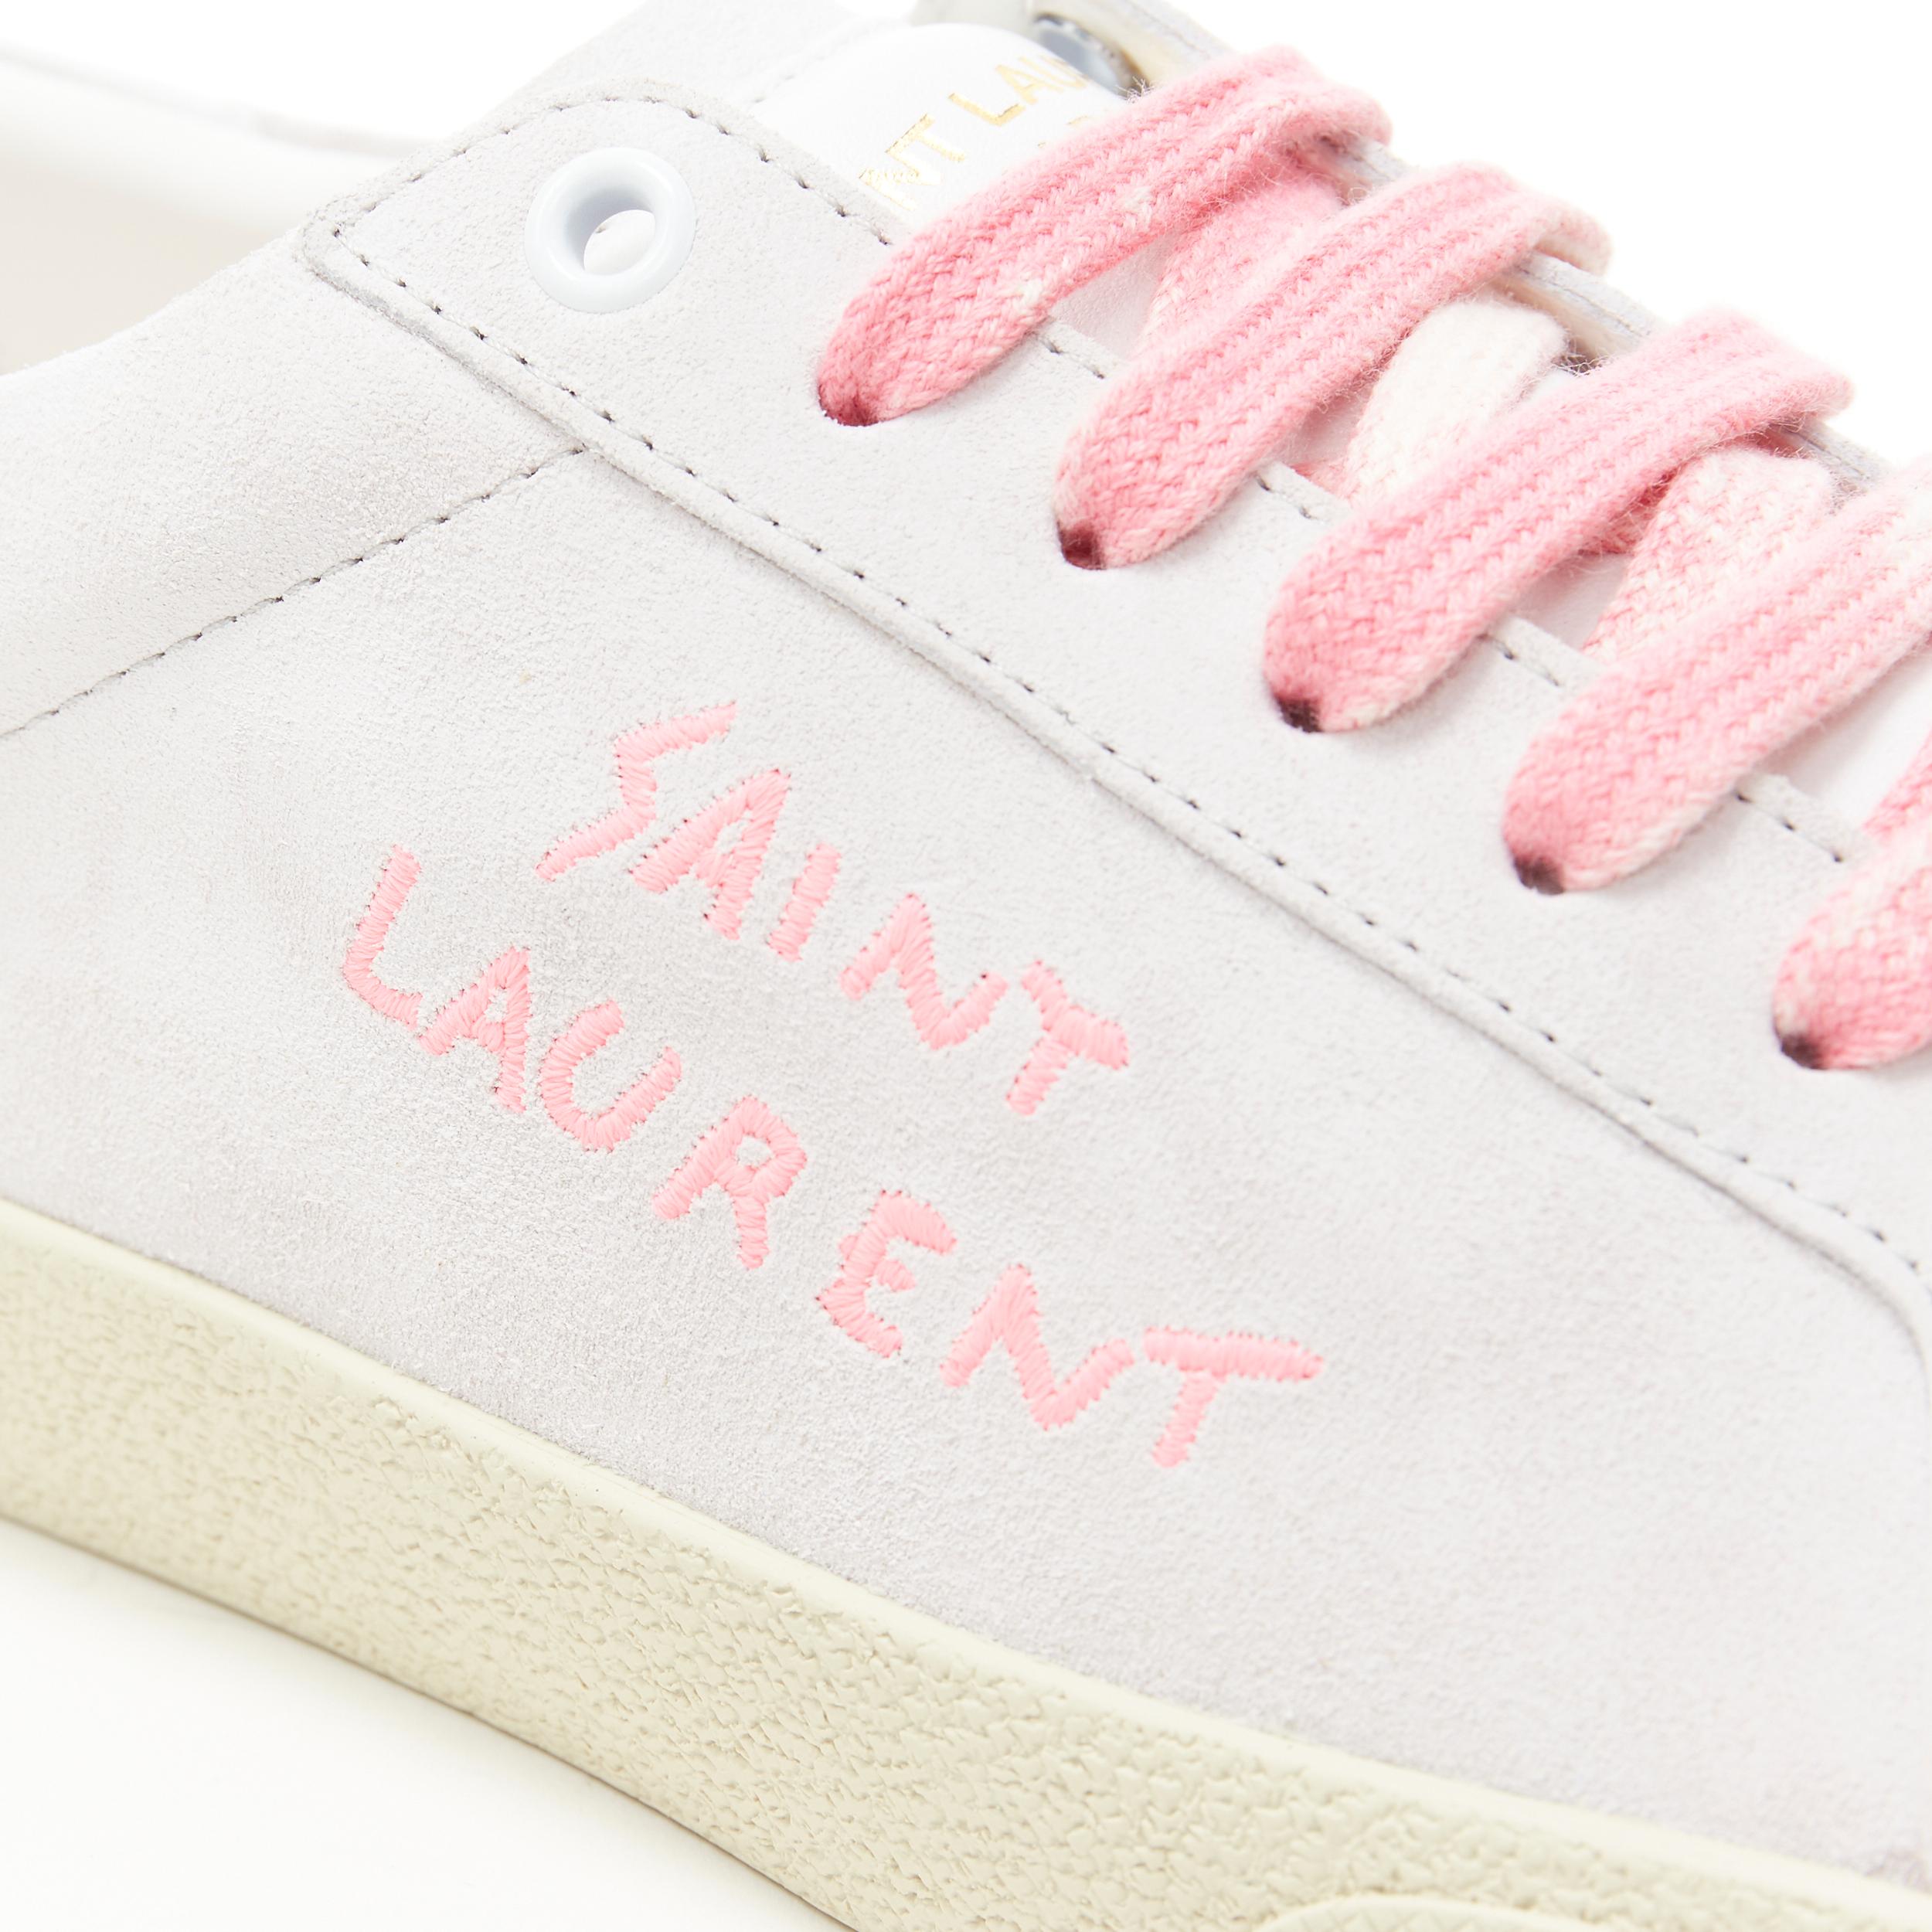 new SAINT LAURENT SL-06 grey suede pink laces logo embroidery low sneaker EU40 
Reference: TGAS/B00612 
Brand: Saint Laurent 
Designer: Anthony Vacarello 
Model: SL-06 
Material: Suede 
Color: Grey 
Pattern: Solid 
Extra Detail: SL-06. Light grey